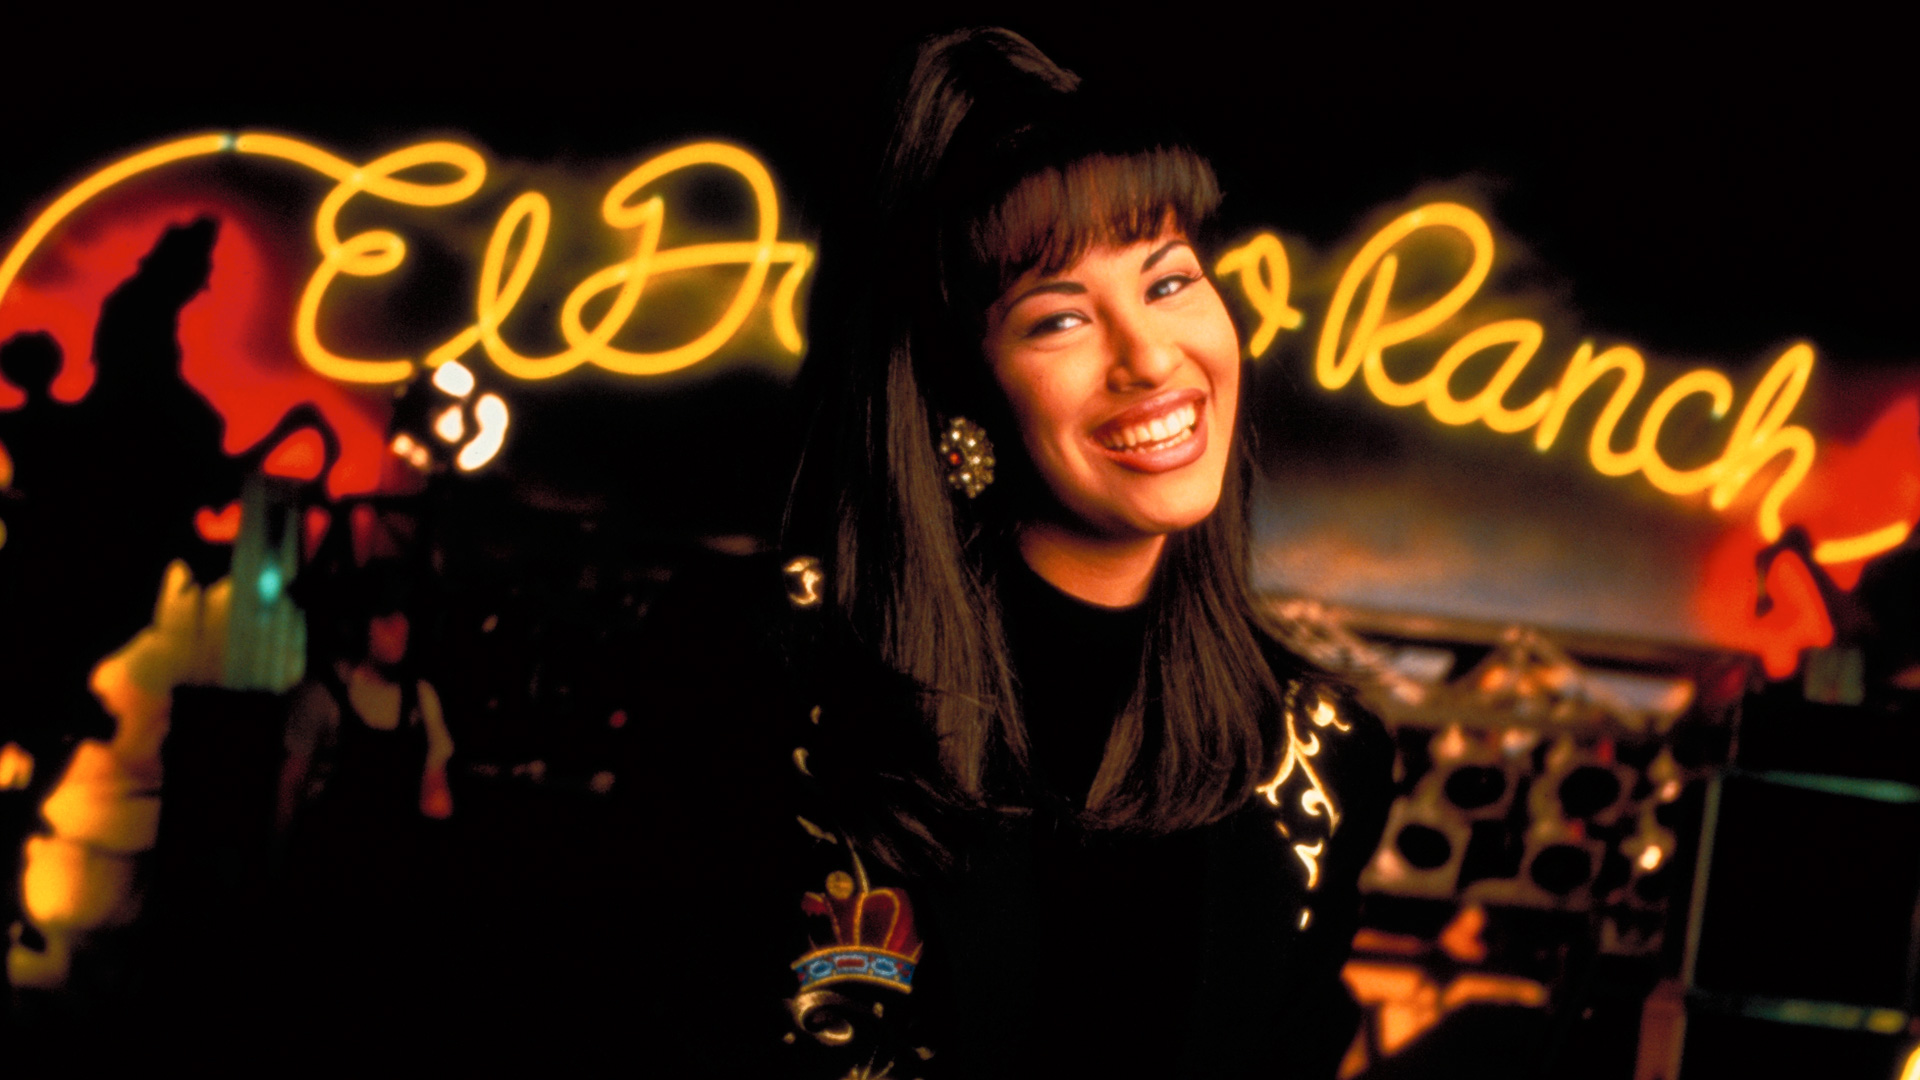 April 16, 1971: Selena Quintanilla Was Born and Became the Queen of Tejano Music